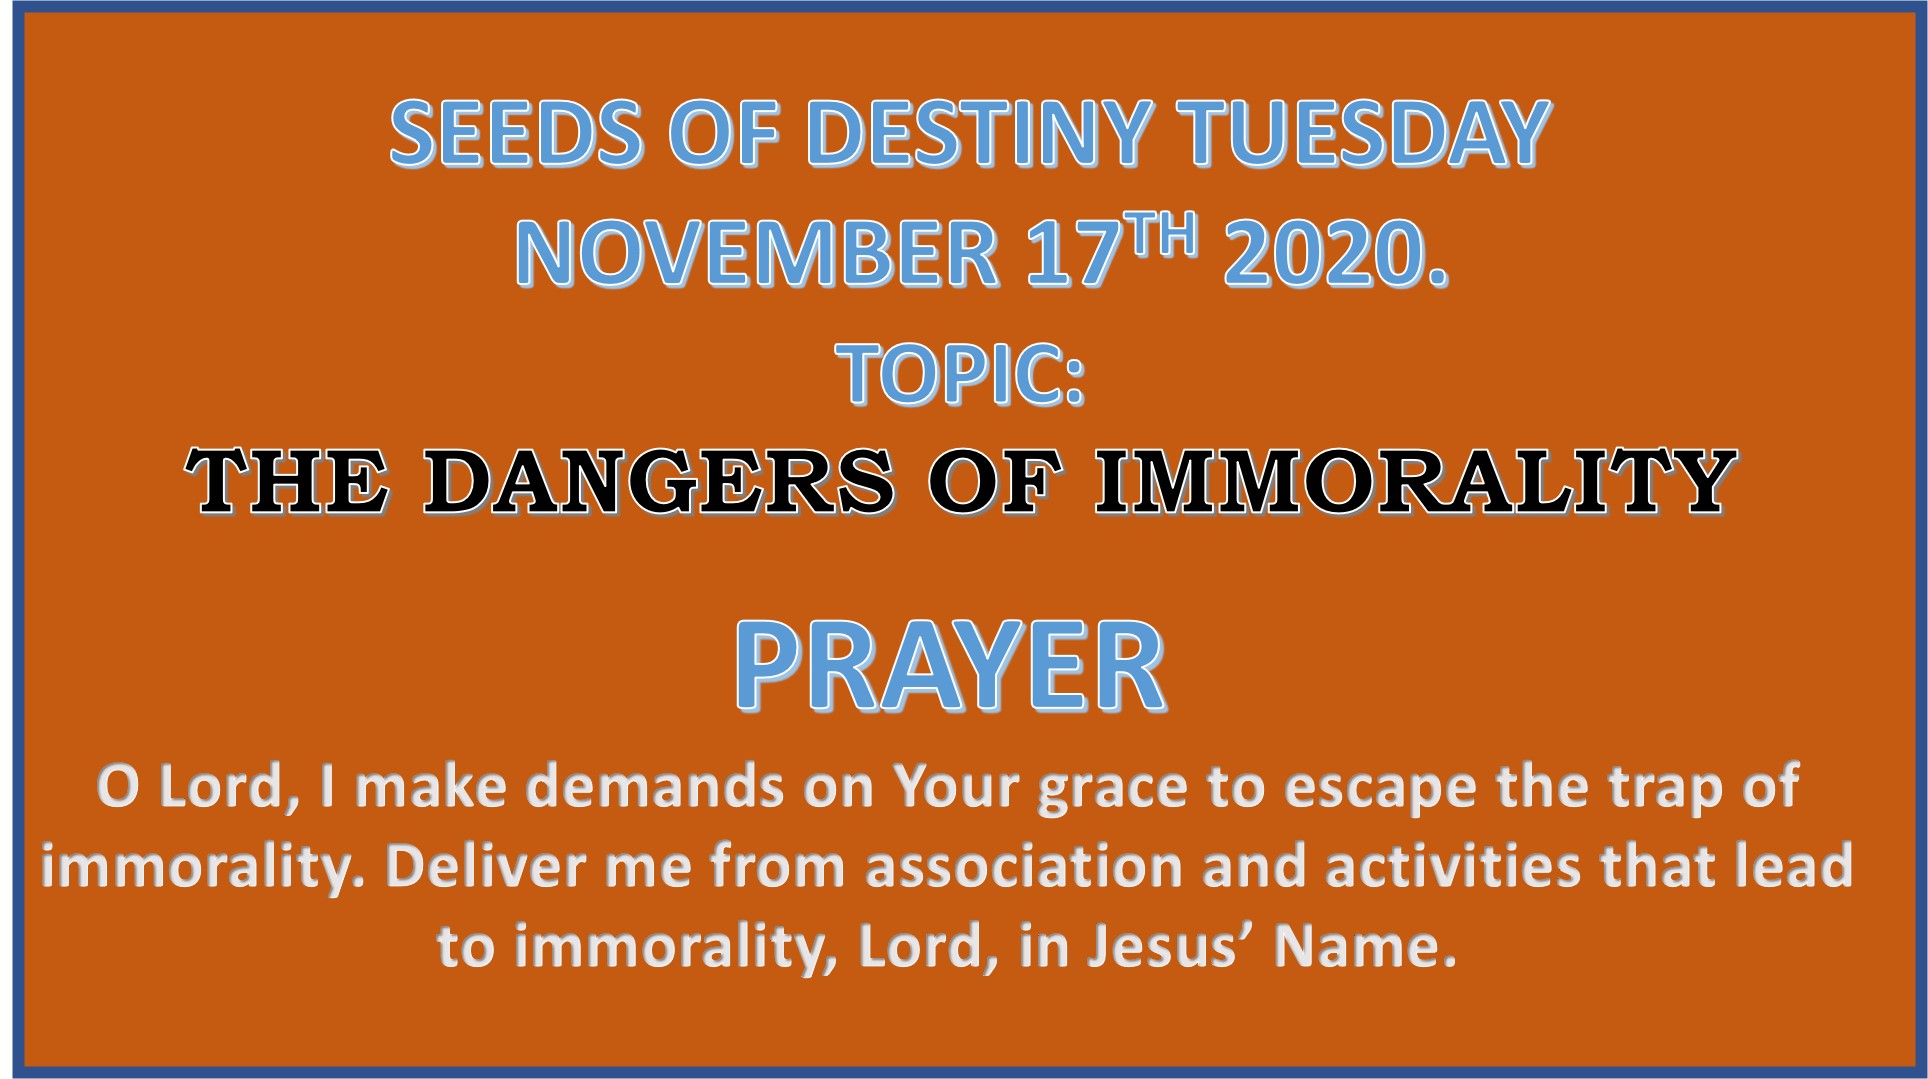 Seeds of Destiny Tuesday 17th November 2020 by Dr Paul Enenche